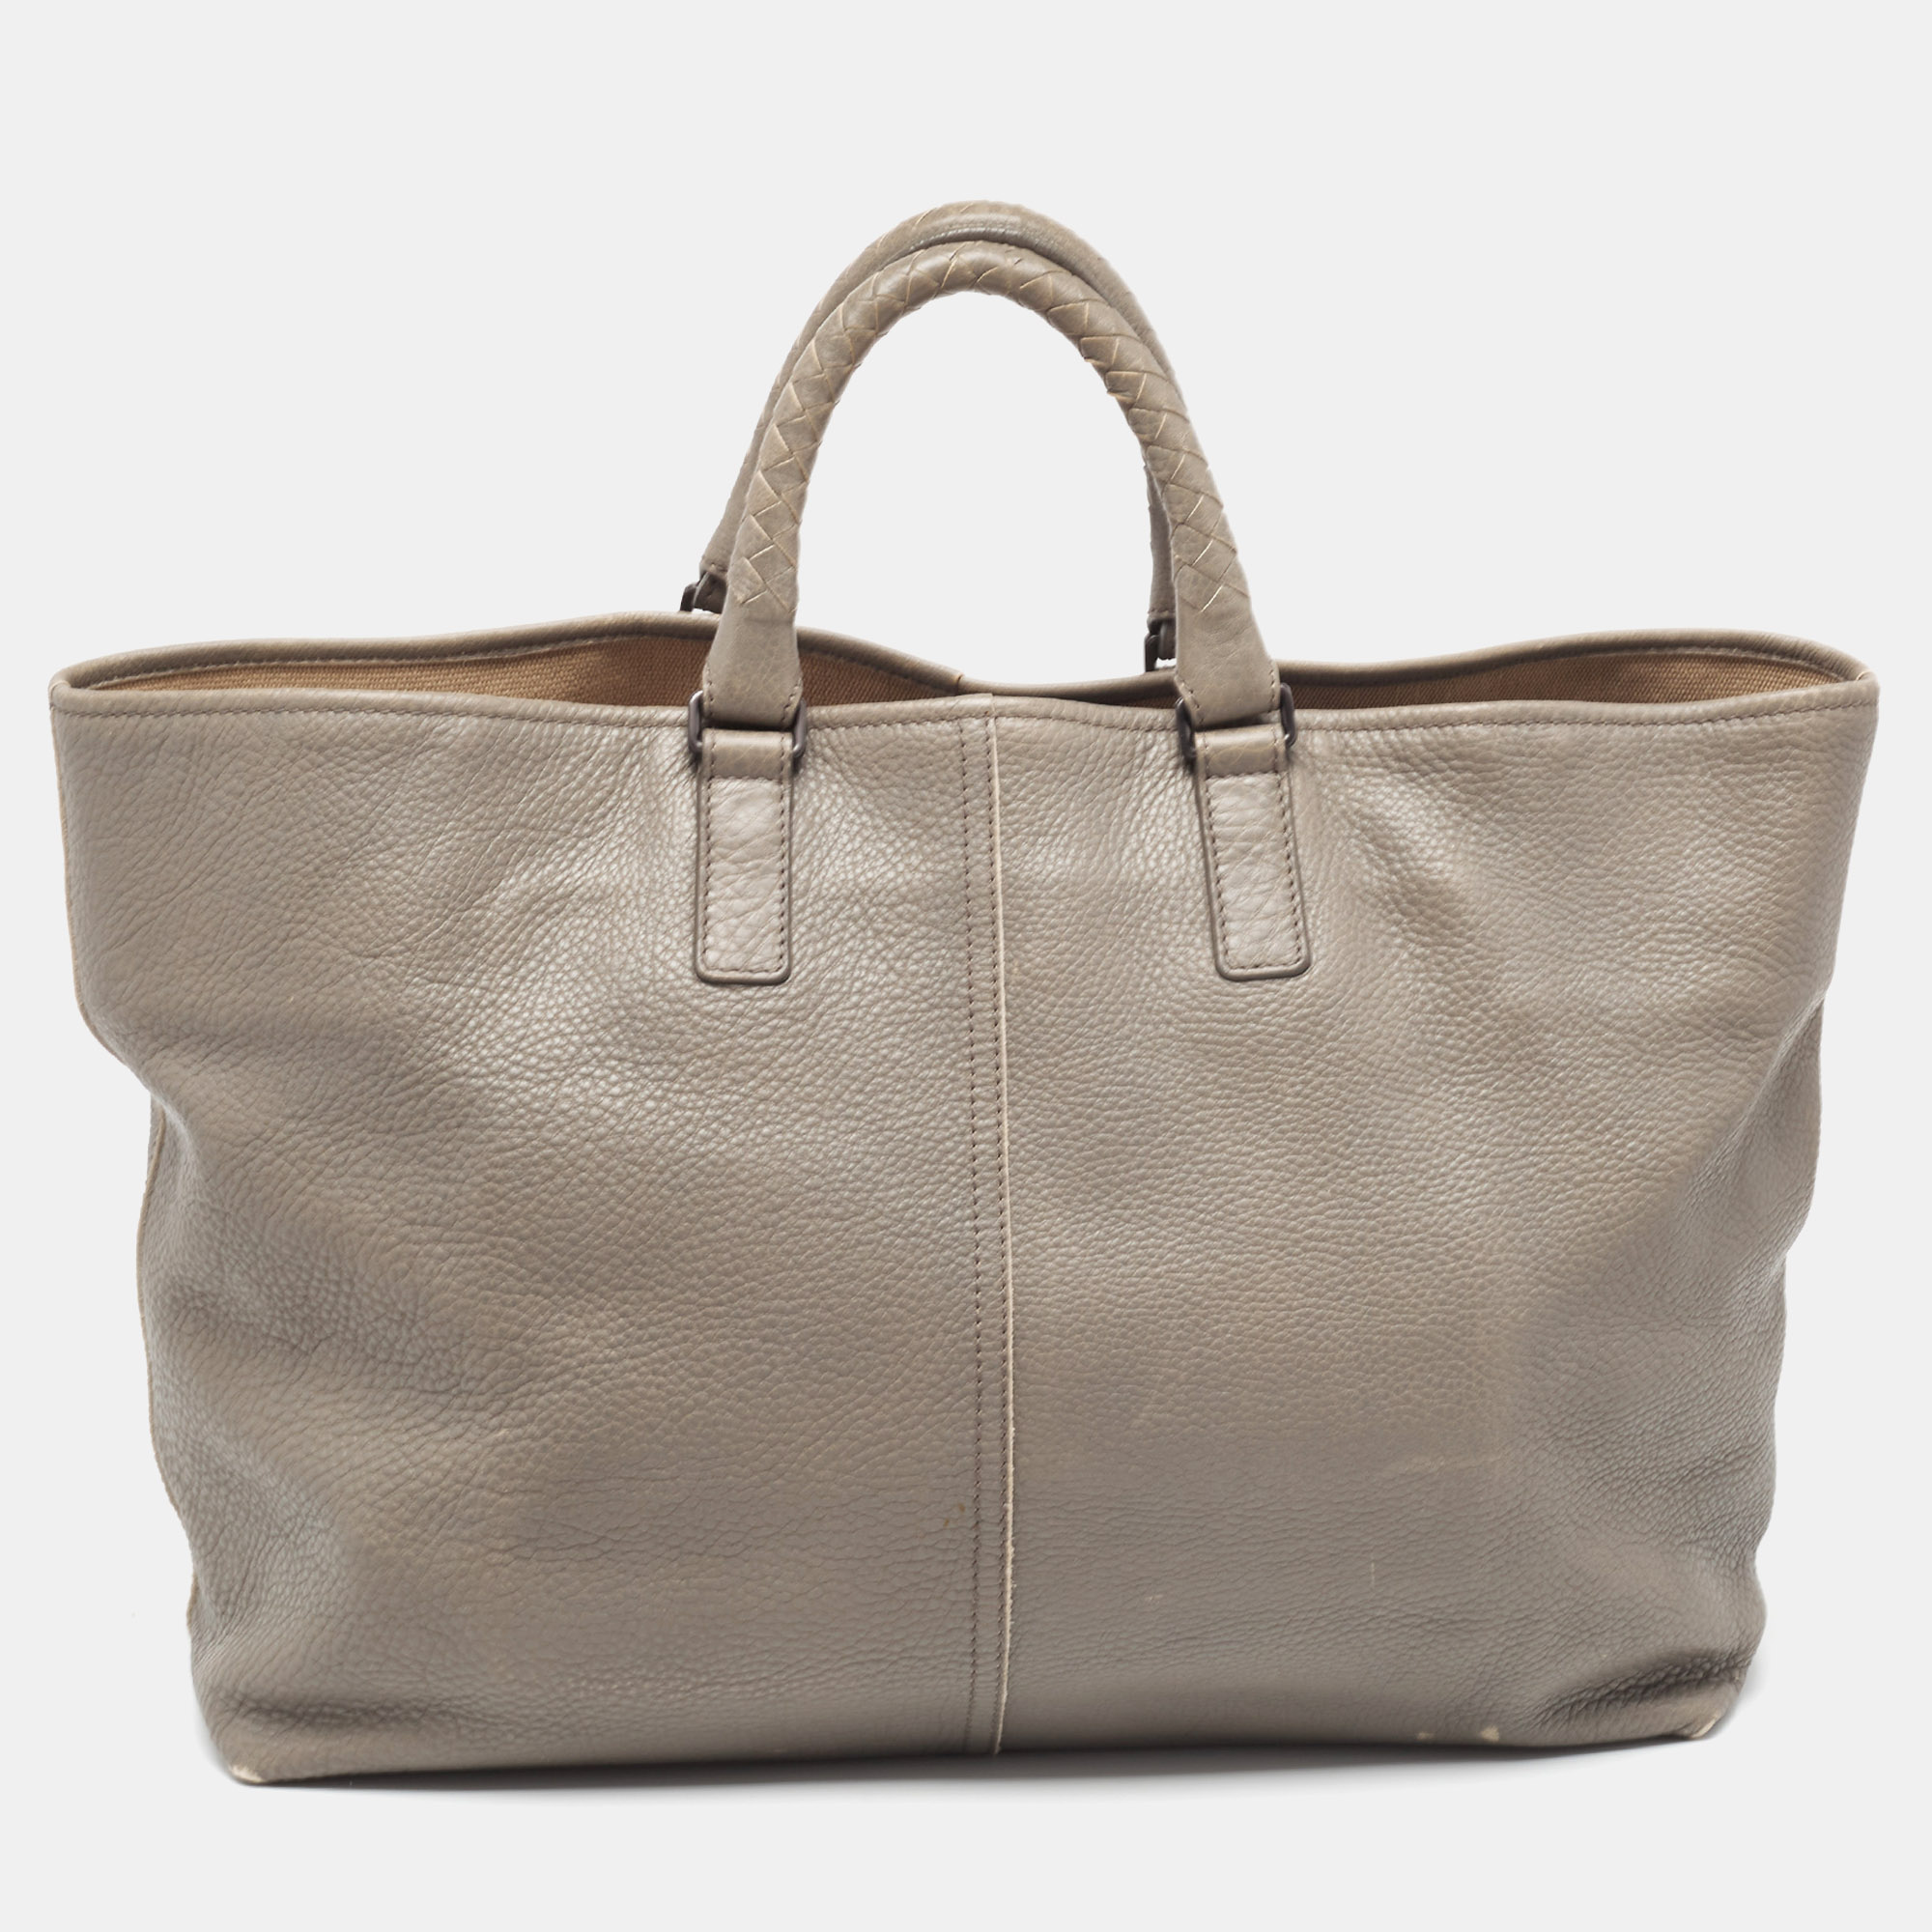 Thoughtful details high quality and everyday convenience mark this Bottega Veneta Intrecciato bag for women. The bag is sewn with skill to deliver a refined look and an impeccable finish.